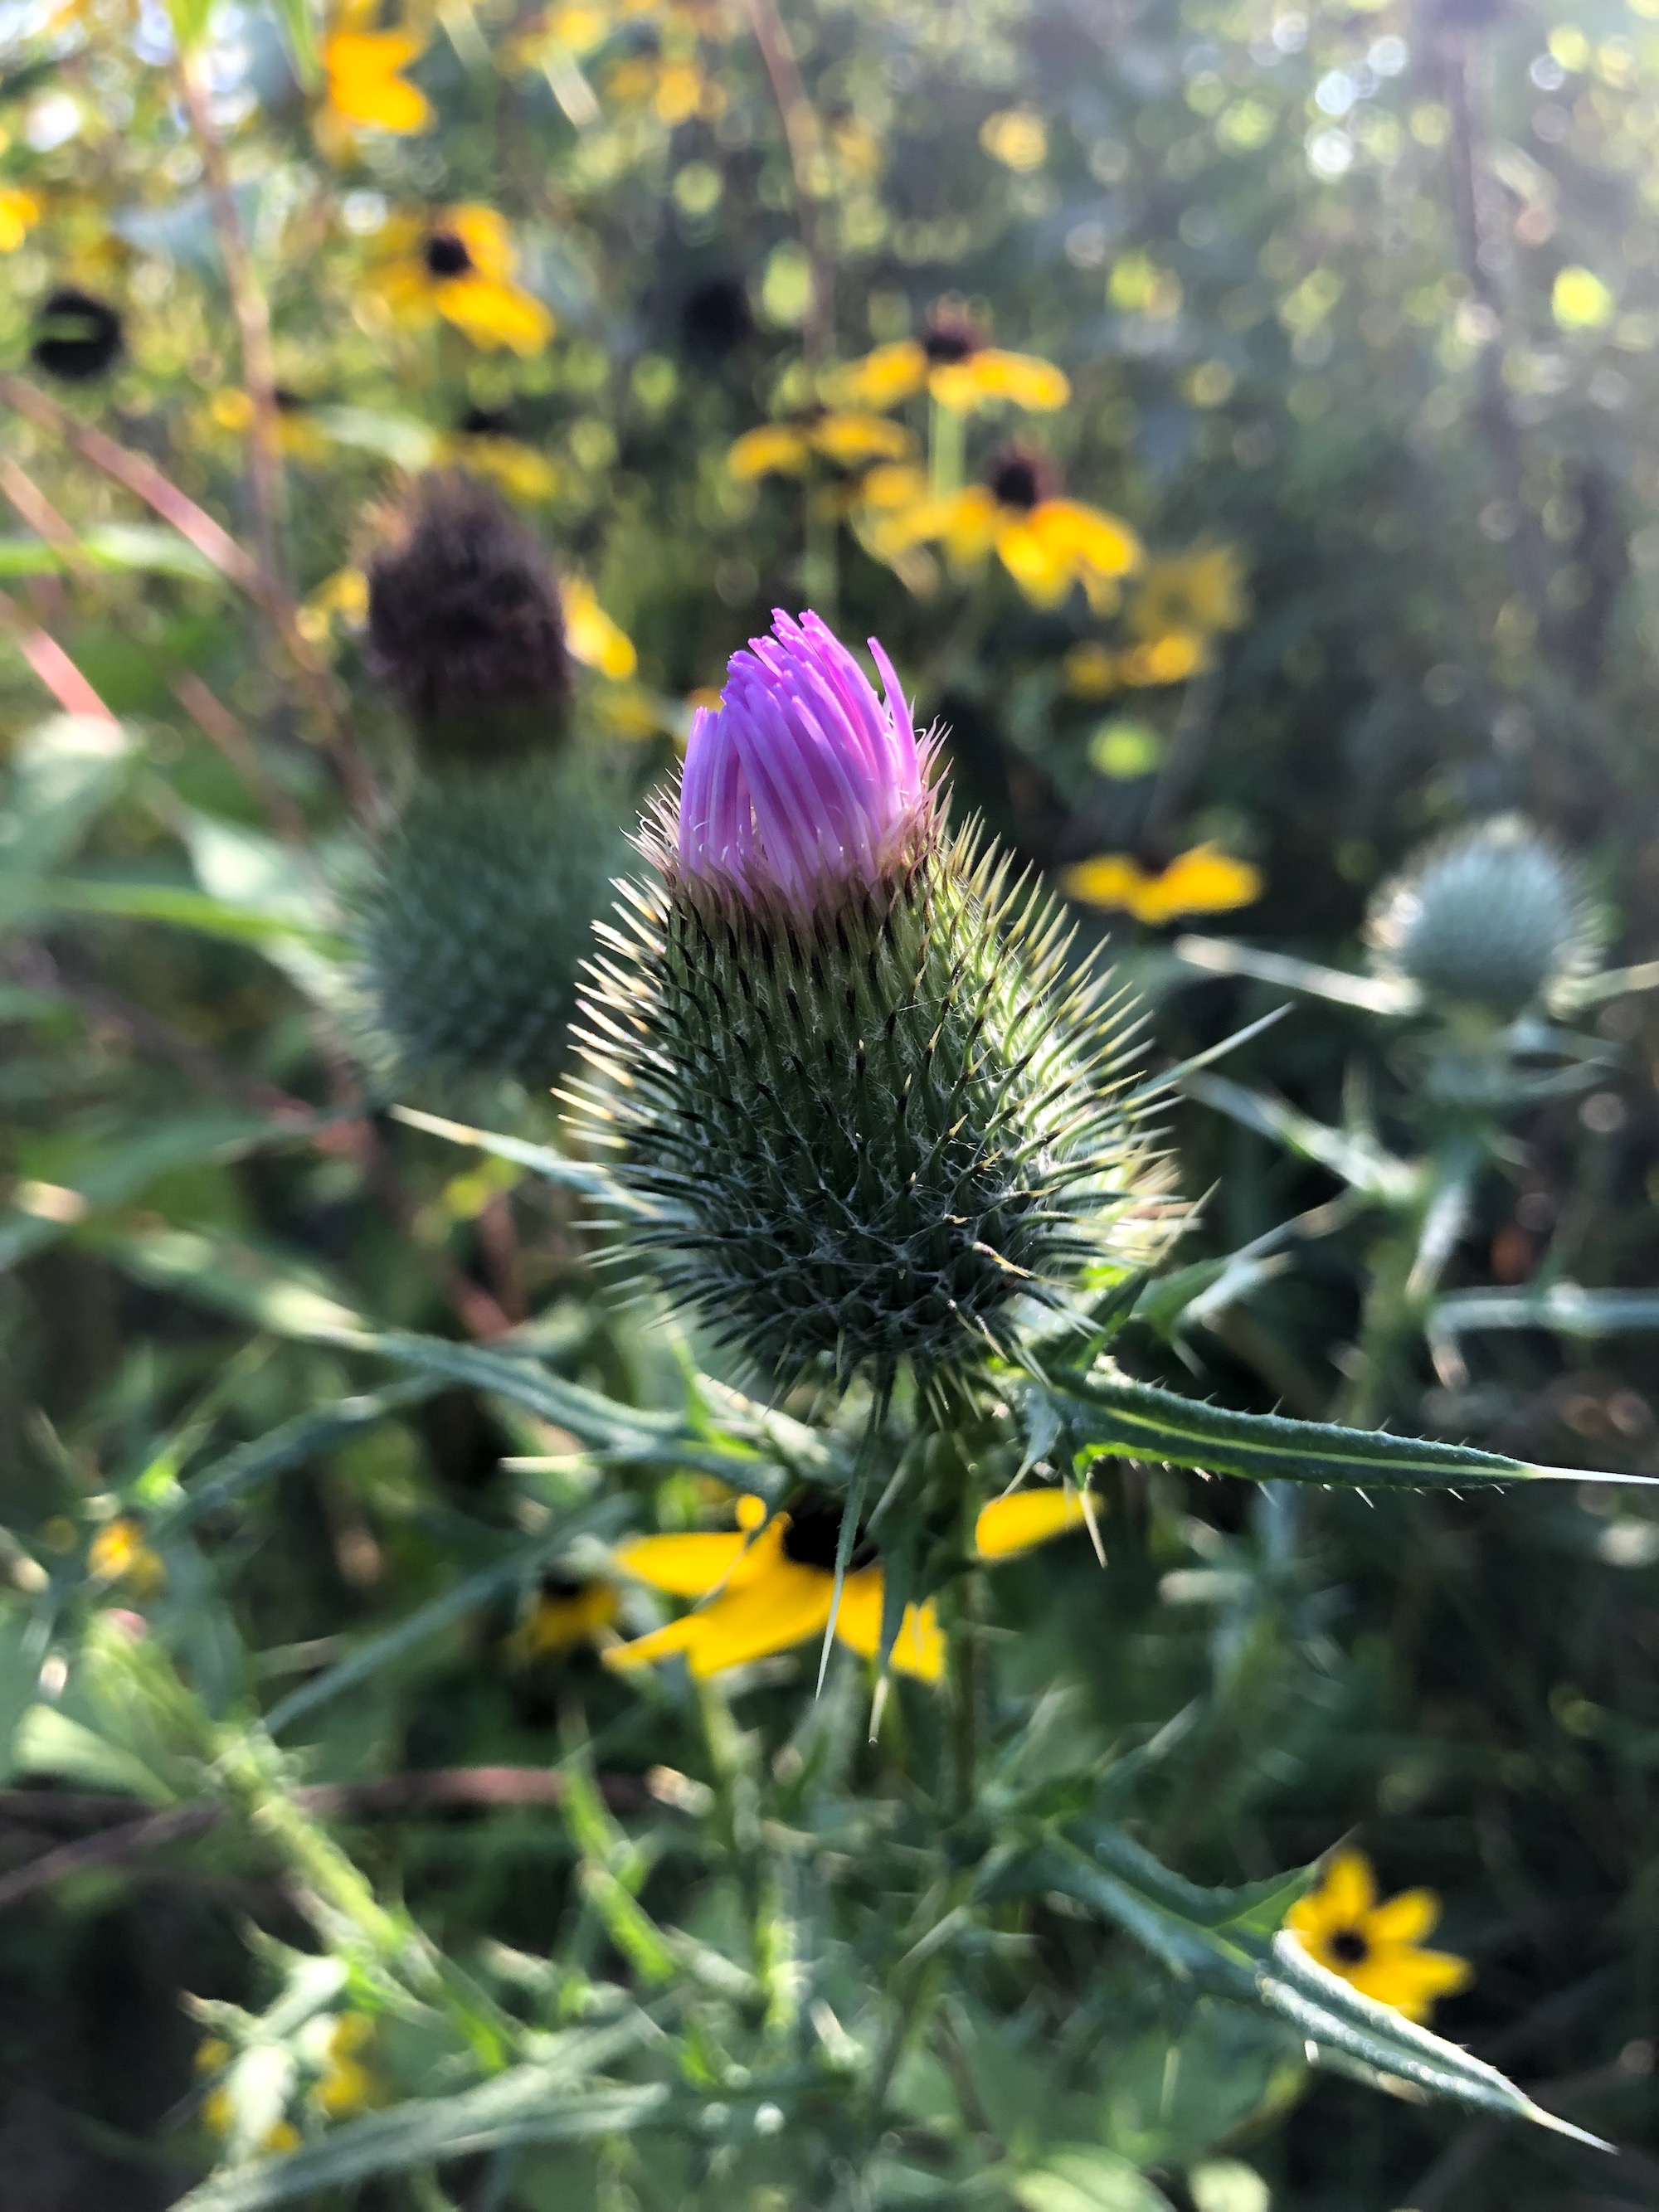 Bull Thistle growing around shore of retaining pond in Madison, Wisconsin on September 2, 2019.